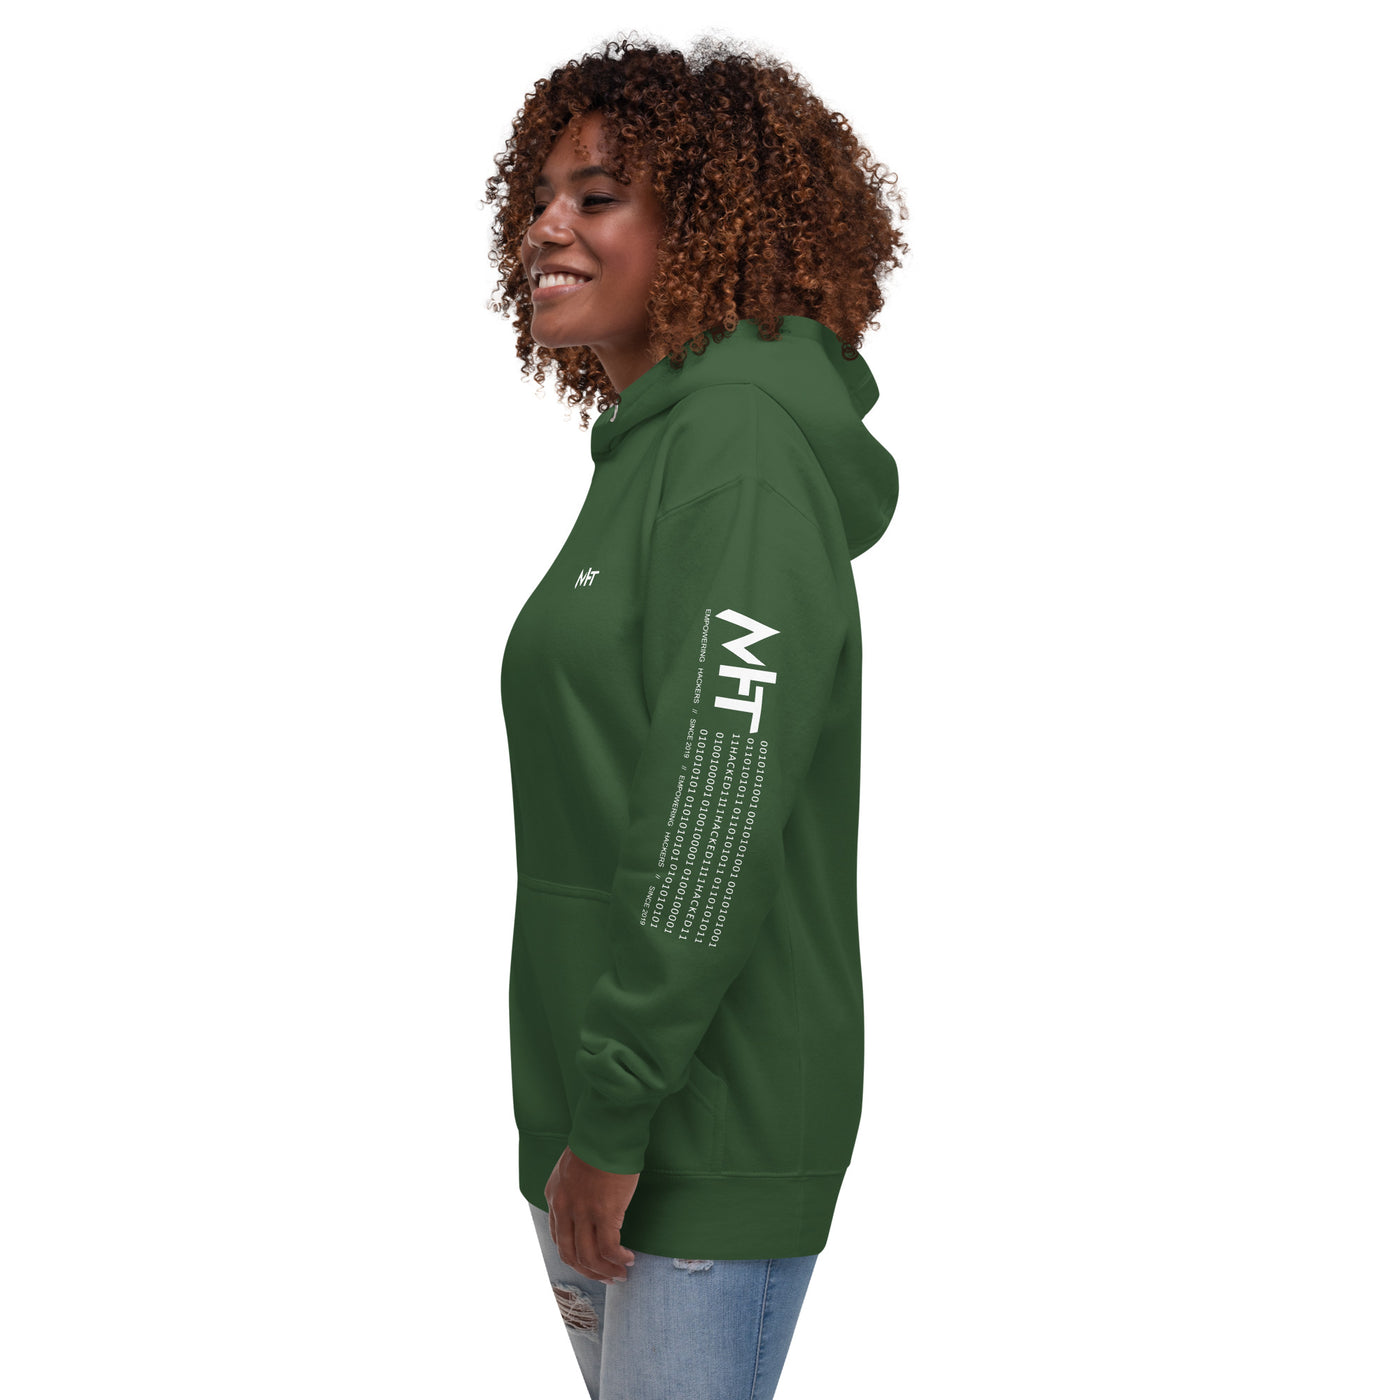 Money can't Buy you happiness but it can Buy you Stock and that was close - Unisex Hoodie ( Back Print )